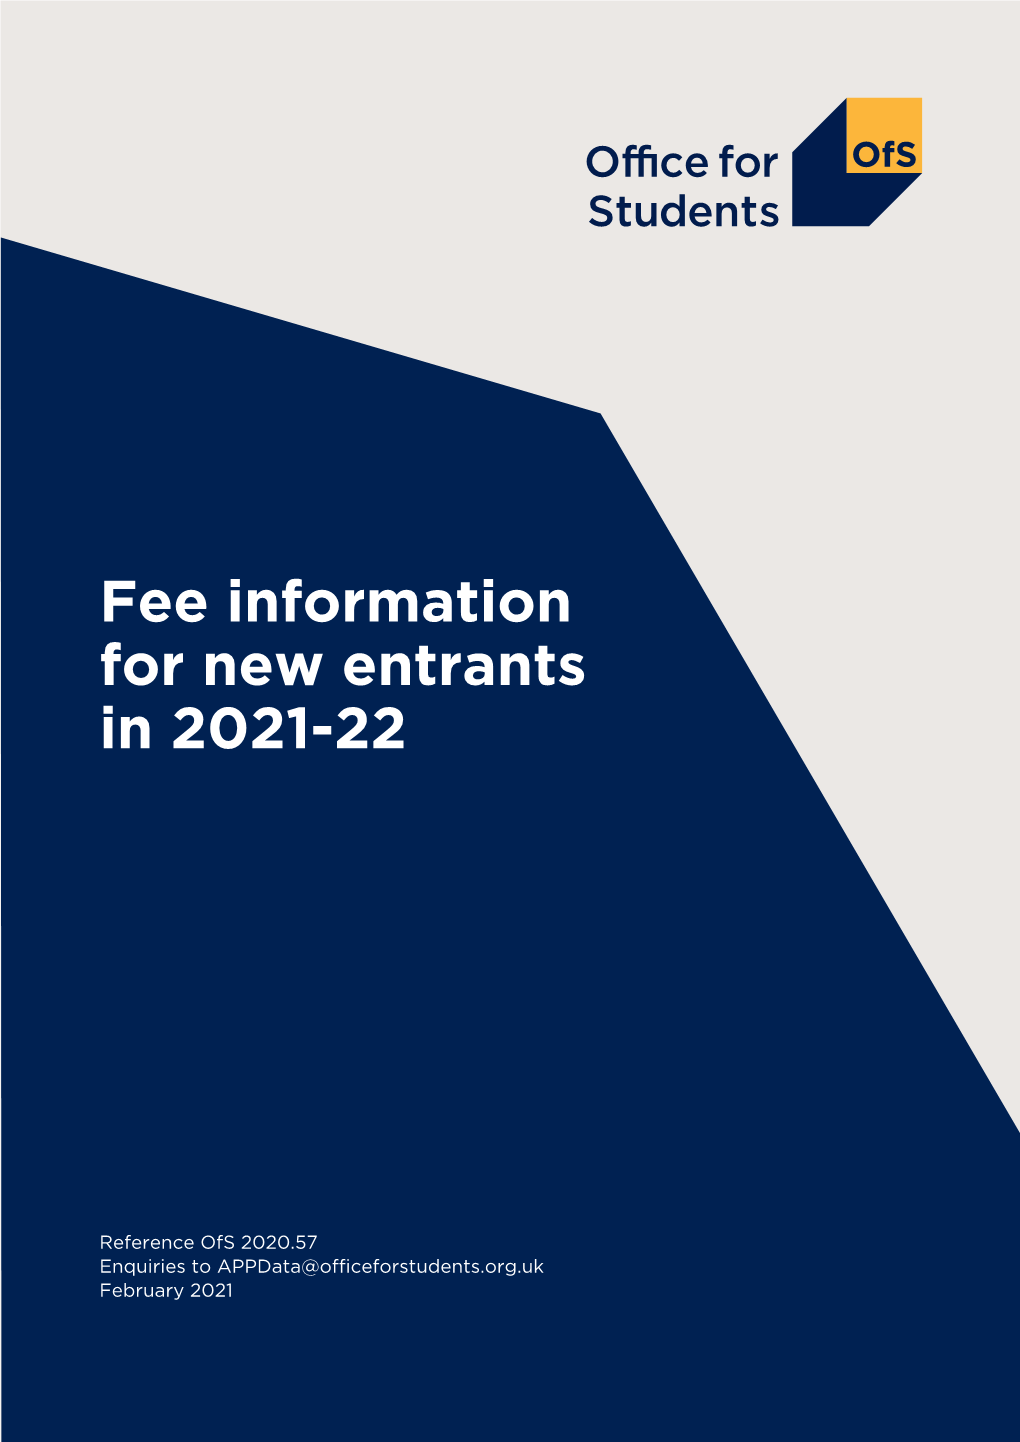 Office for Students: Fee Information for New Entrants in 2021-22